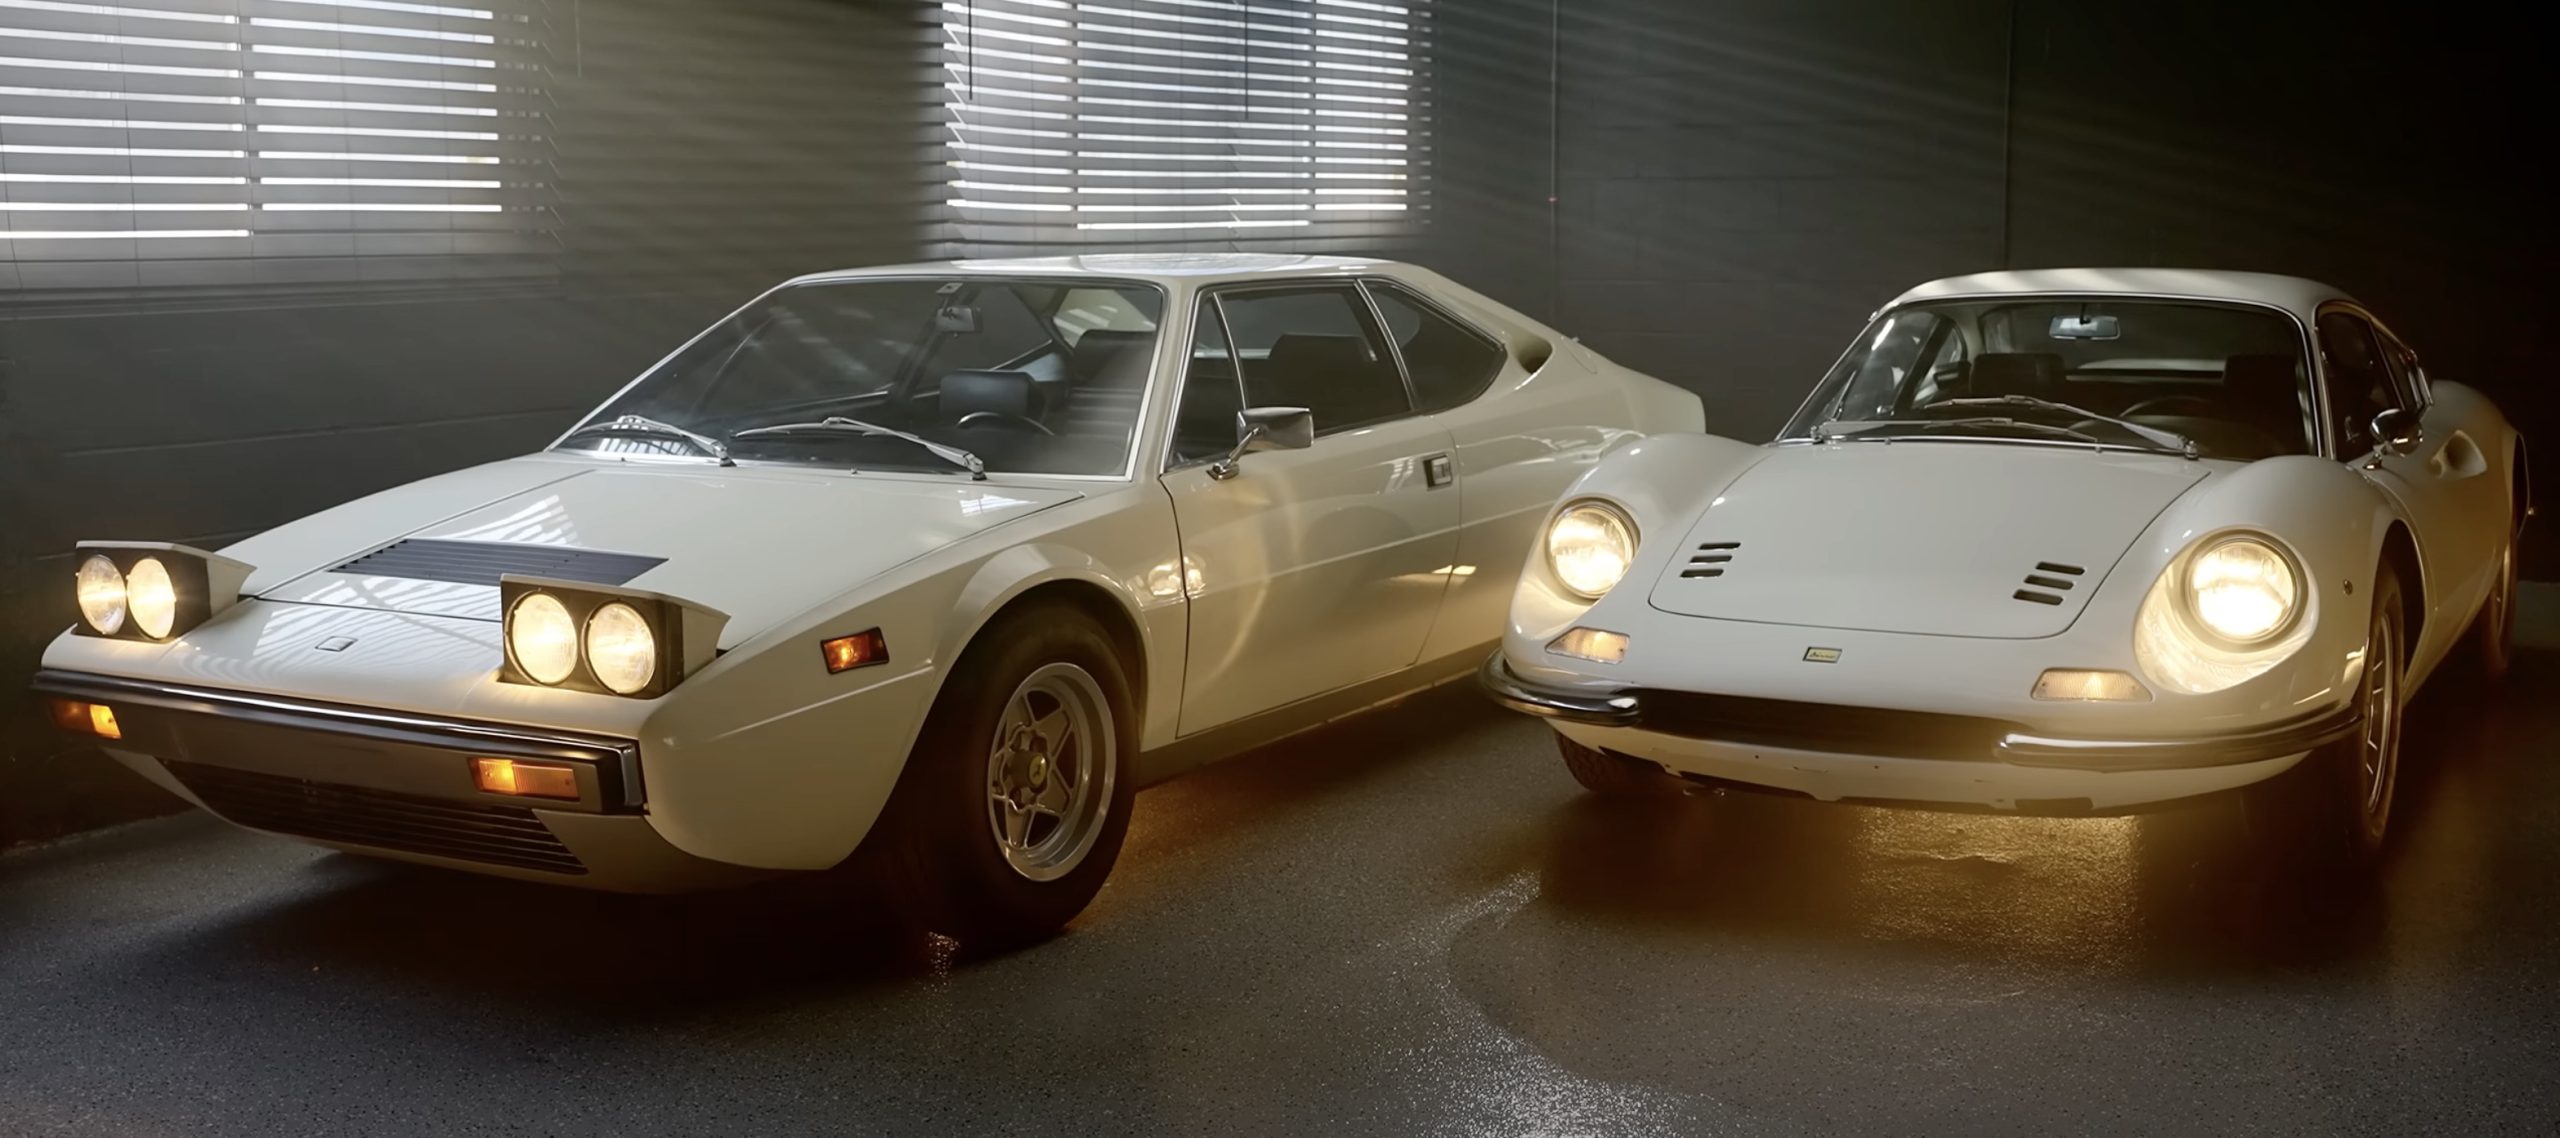 Revelations: The Dino 246 and 308 GT4 Were Not “Less-Than” Ferraris